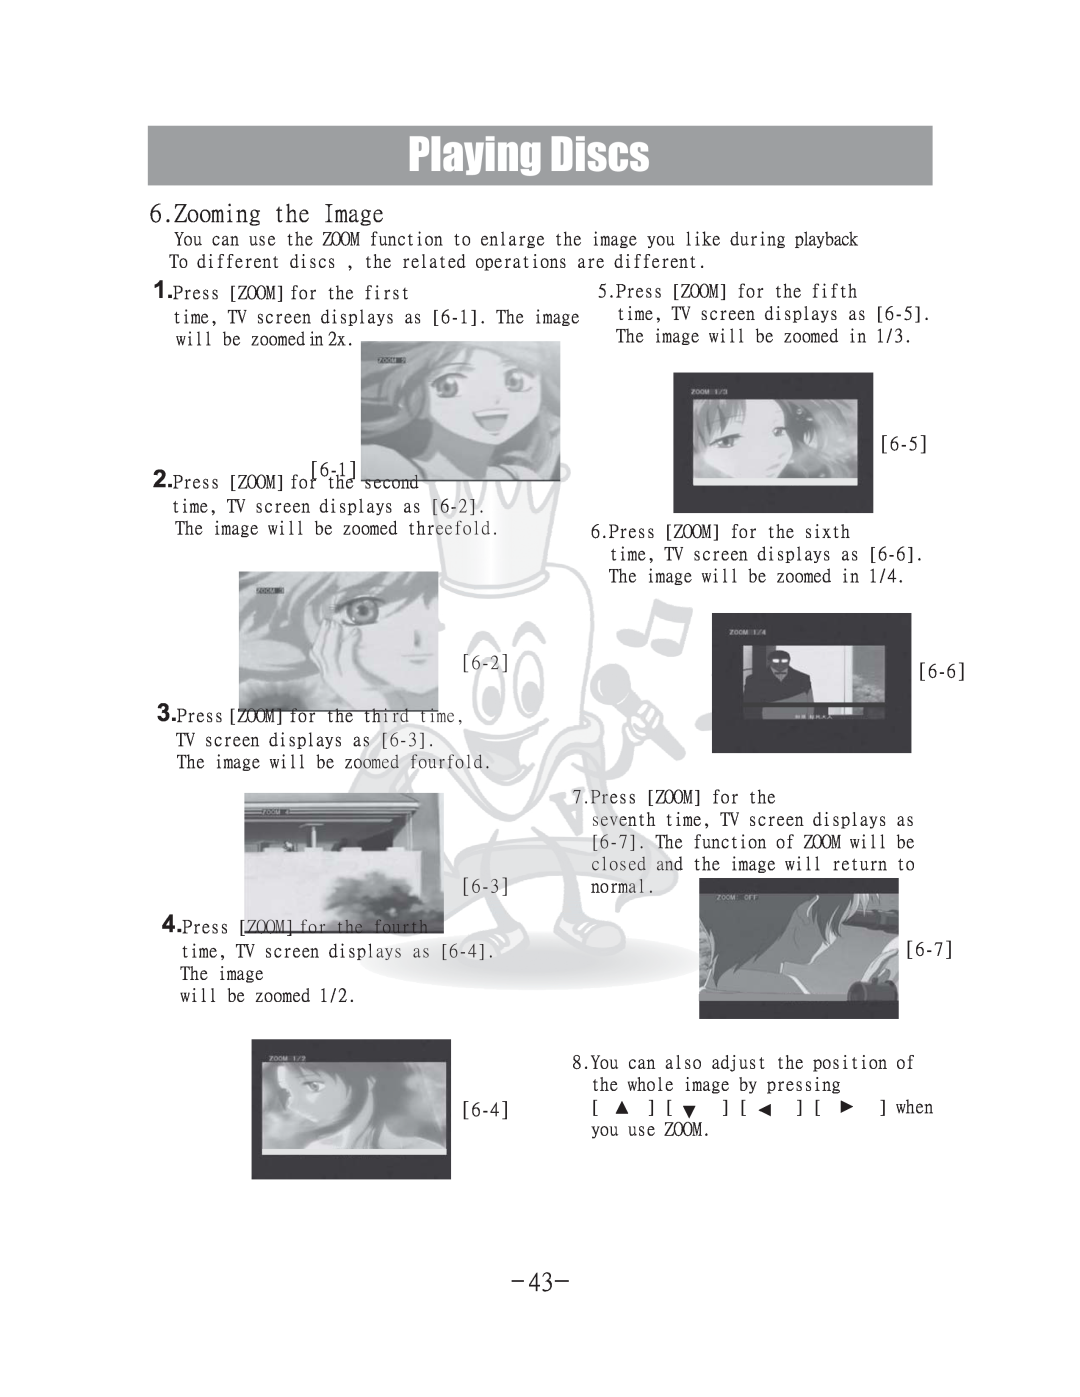 Acesonic DGX-400 user manual Zooming the Image, Playing Discs 